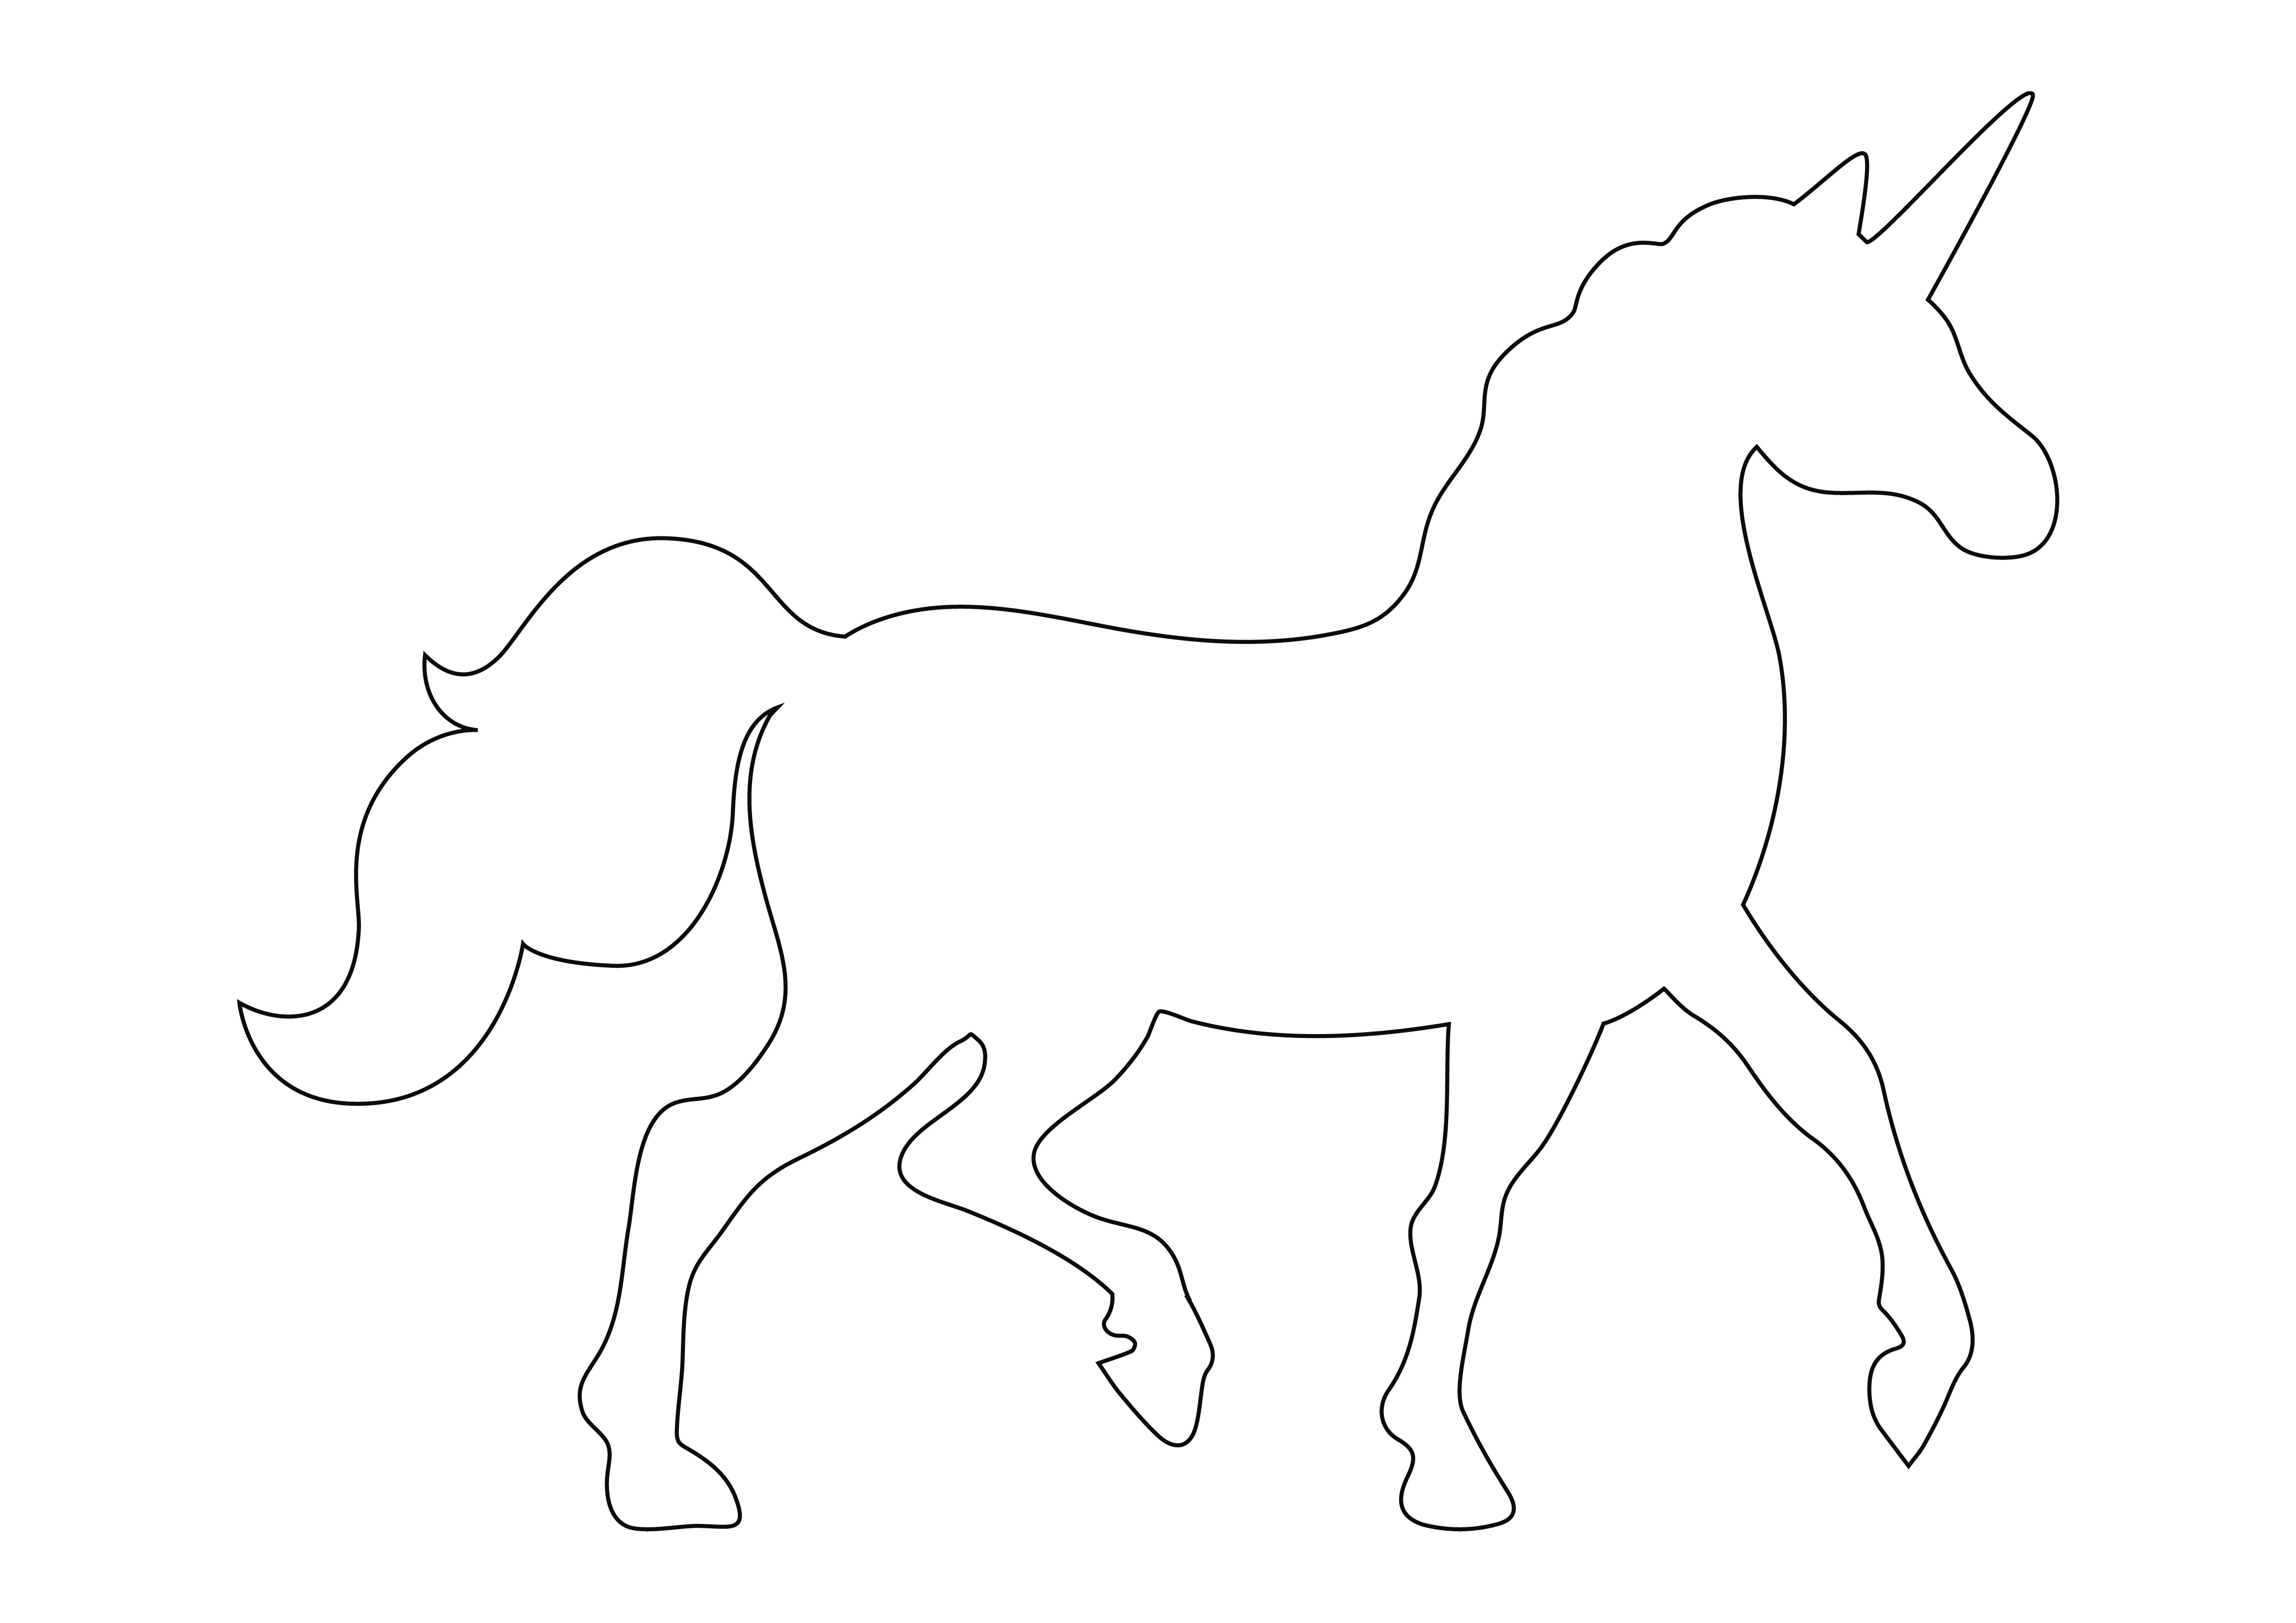 Unicorn for easy-to-create personalized unicorns through coloring and free printing